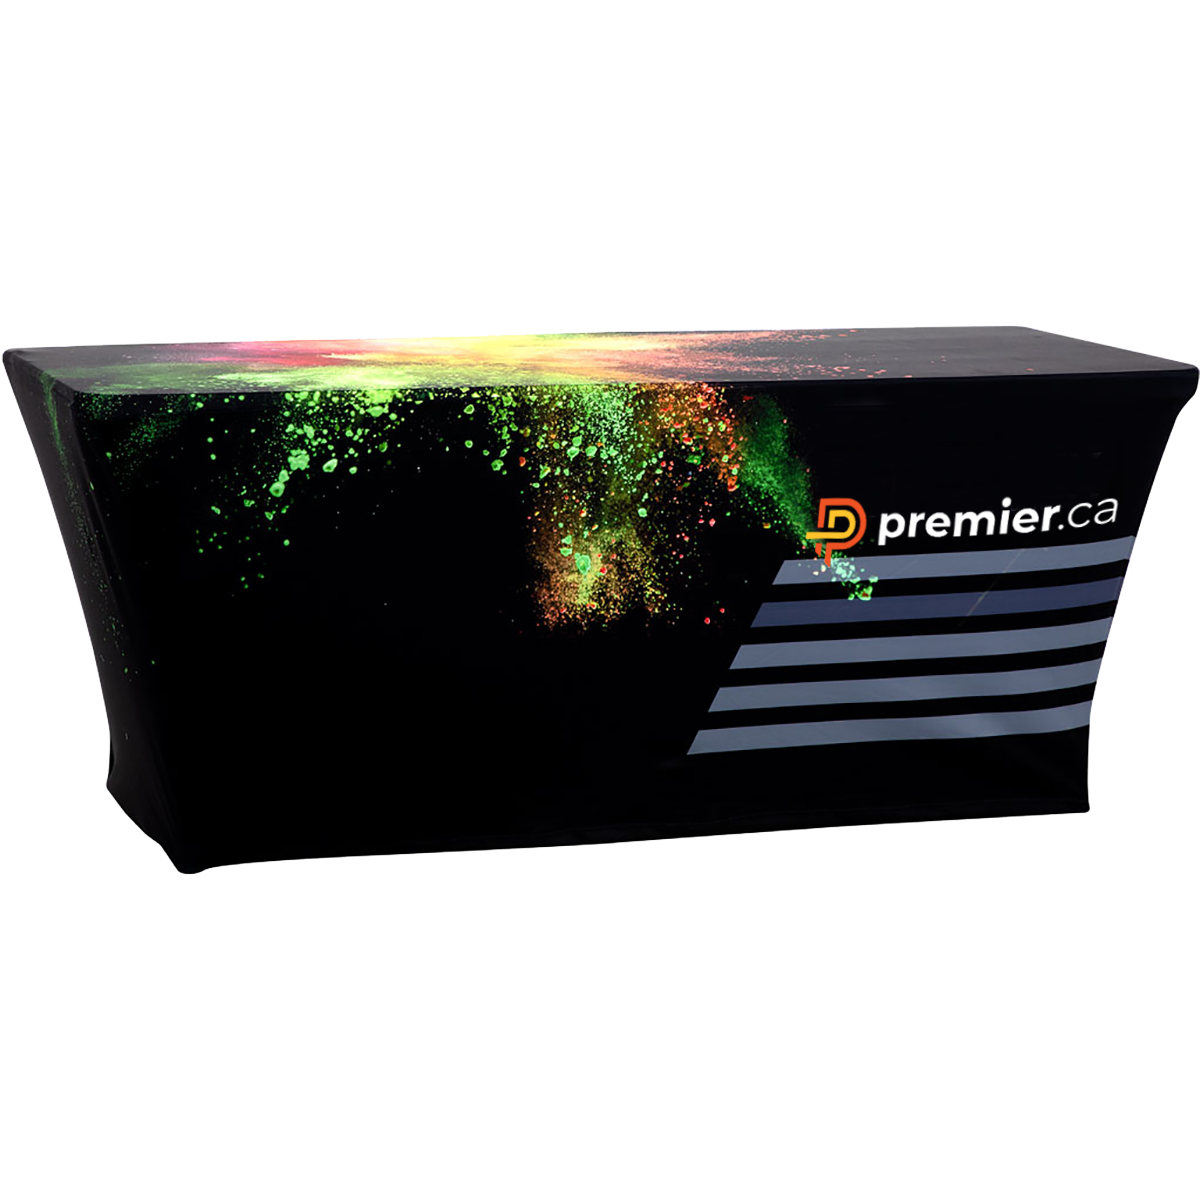 Premier manufactures and sells vibrant dye sublimated display products